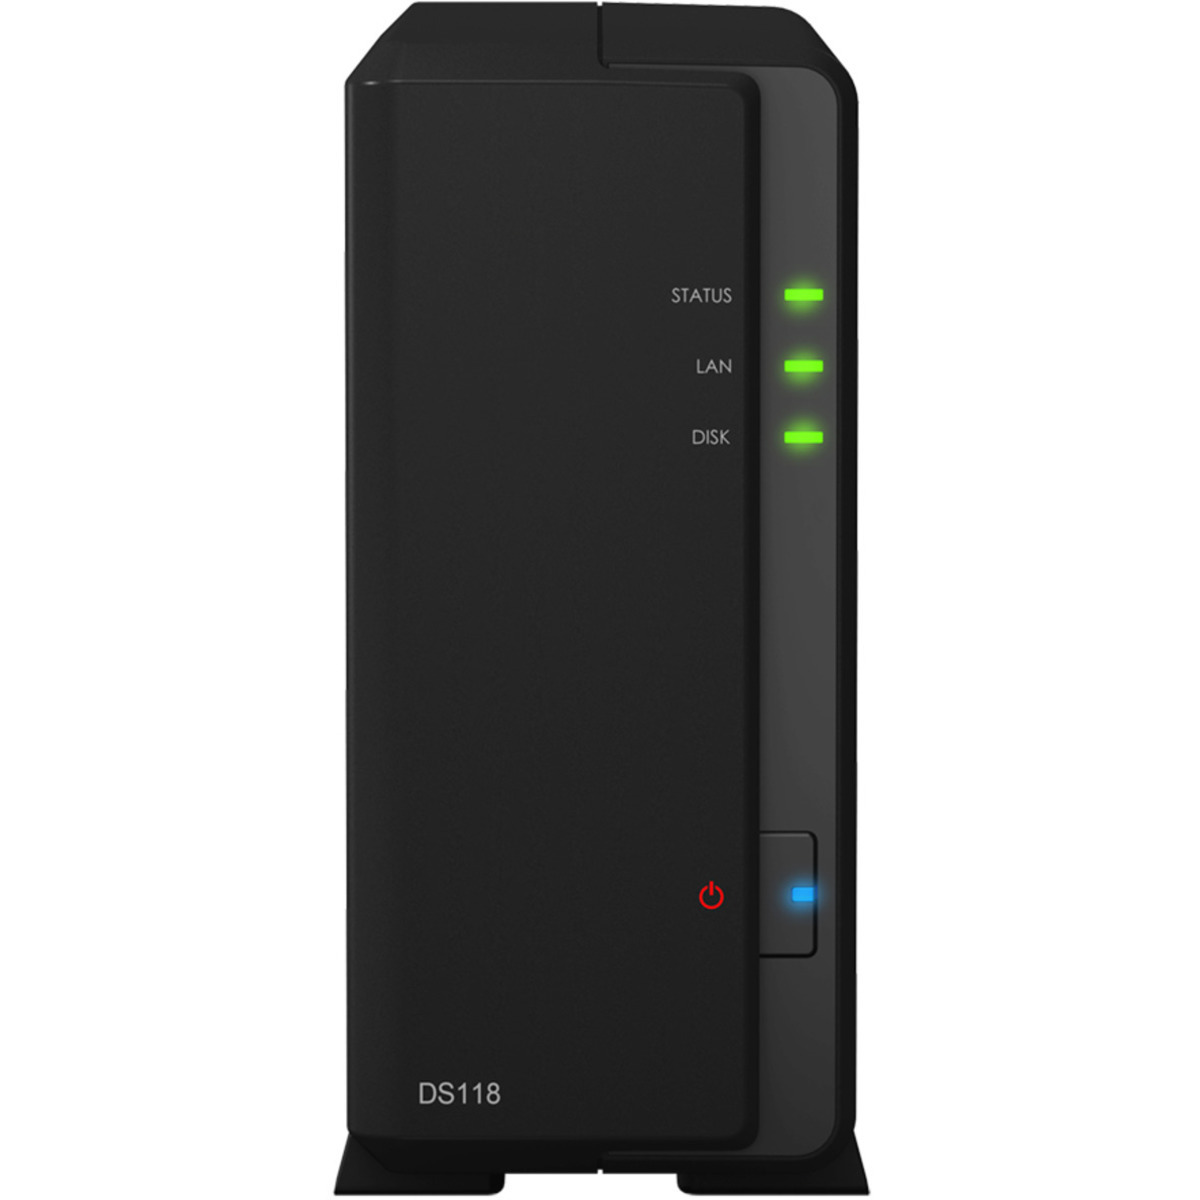 buy $378 Synology DiskStation DS118 1tb Desktop NAS - Network Attached Storage Device 1x1000gb Samsung 870 QVO MZ-77Q1T0 2.5 SATA 6Gb/s SSD CONSUMER Class Drives Installed - Burn-In Tested - nas headquarters buy network attached storage server device das new raid-5 free shipping usa DiskStation DS118